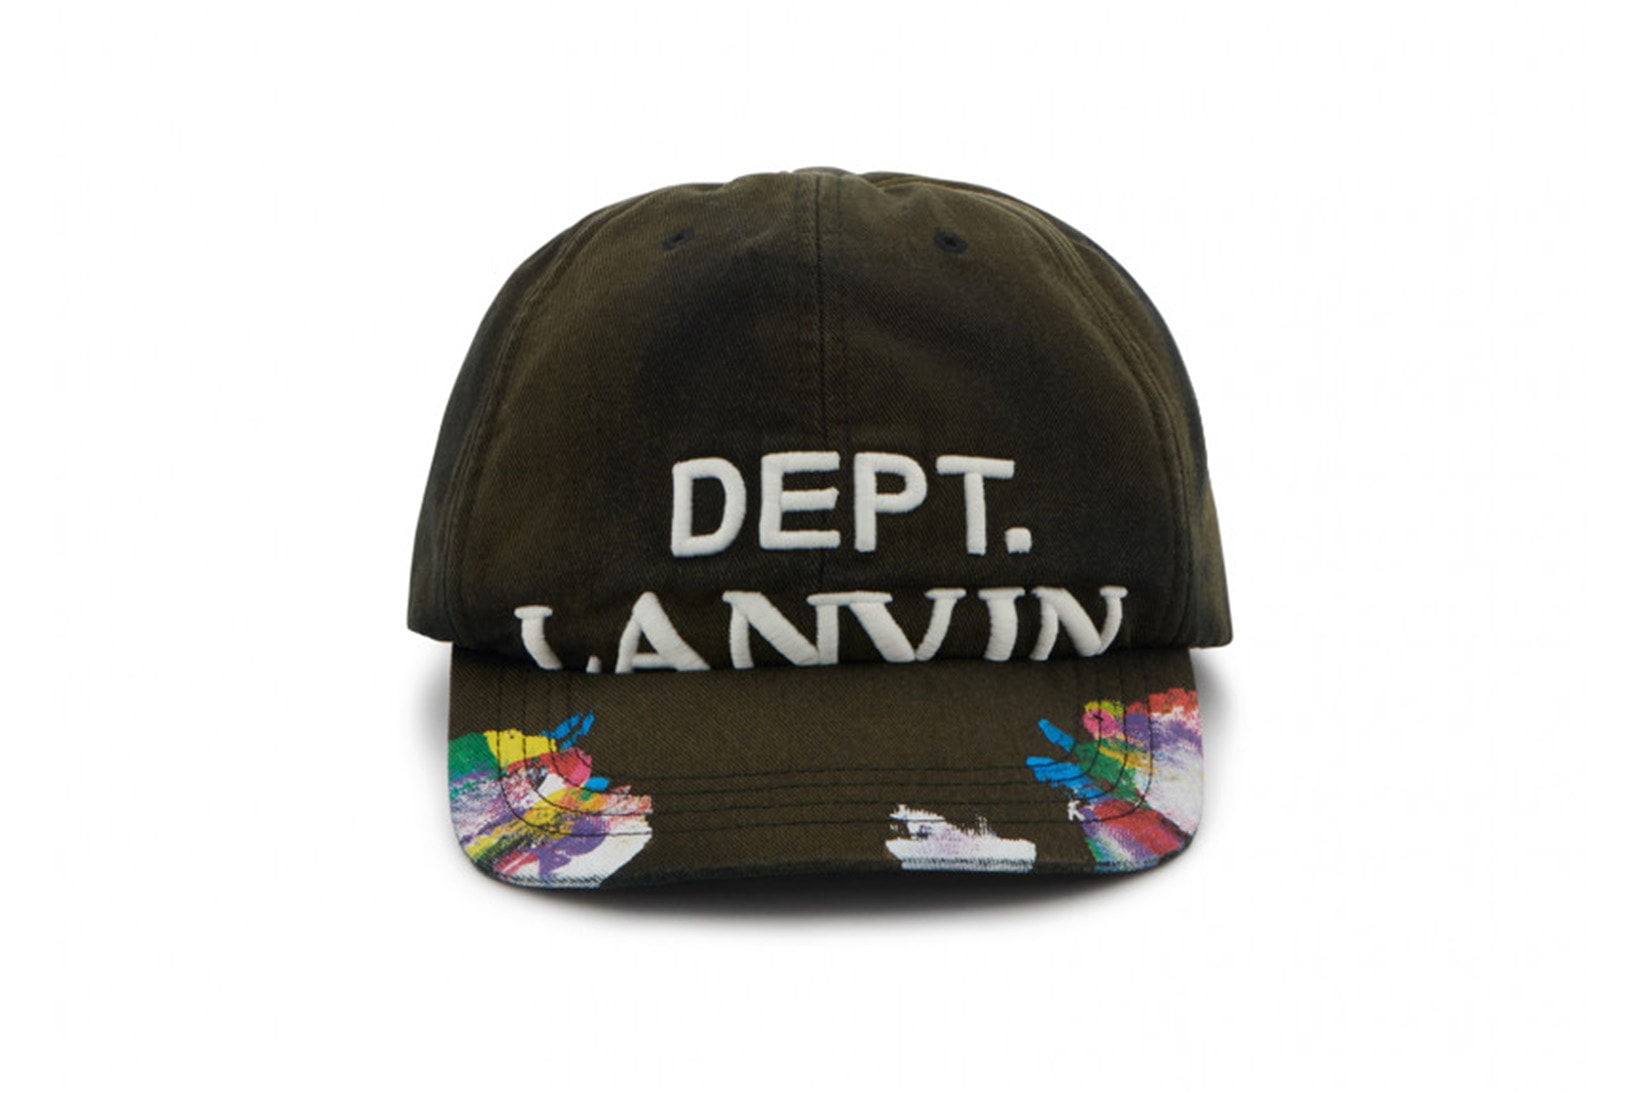 lanvin gallery dept collection hoodies sneakers t-shirts tees release info cap